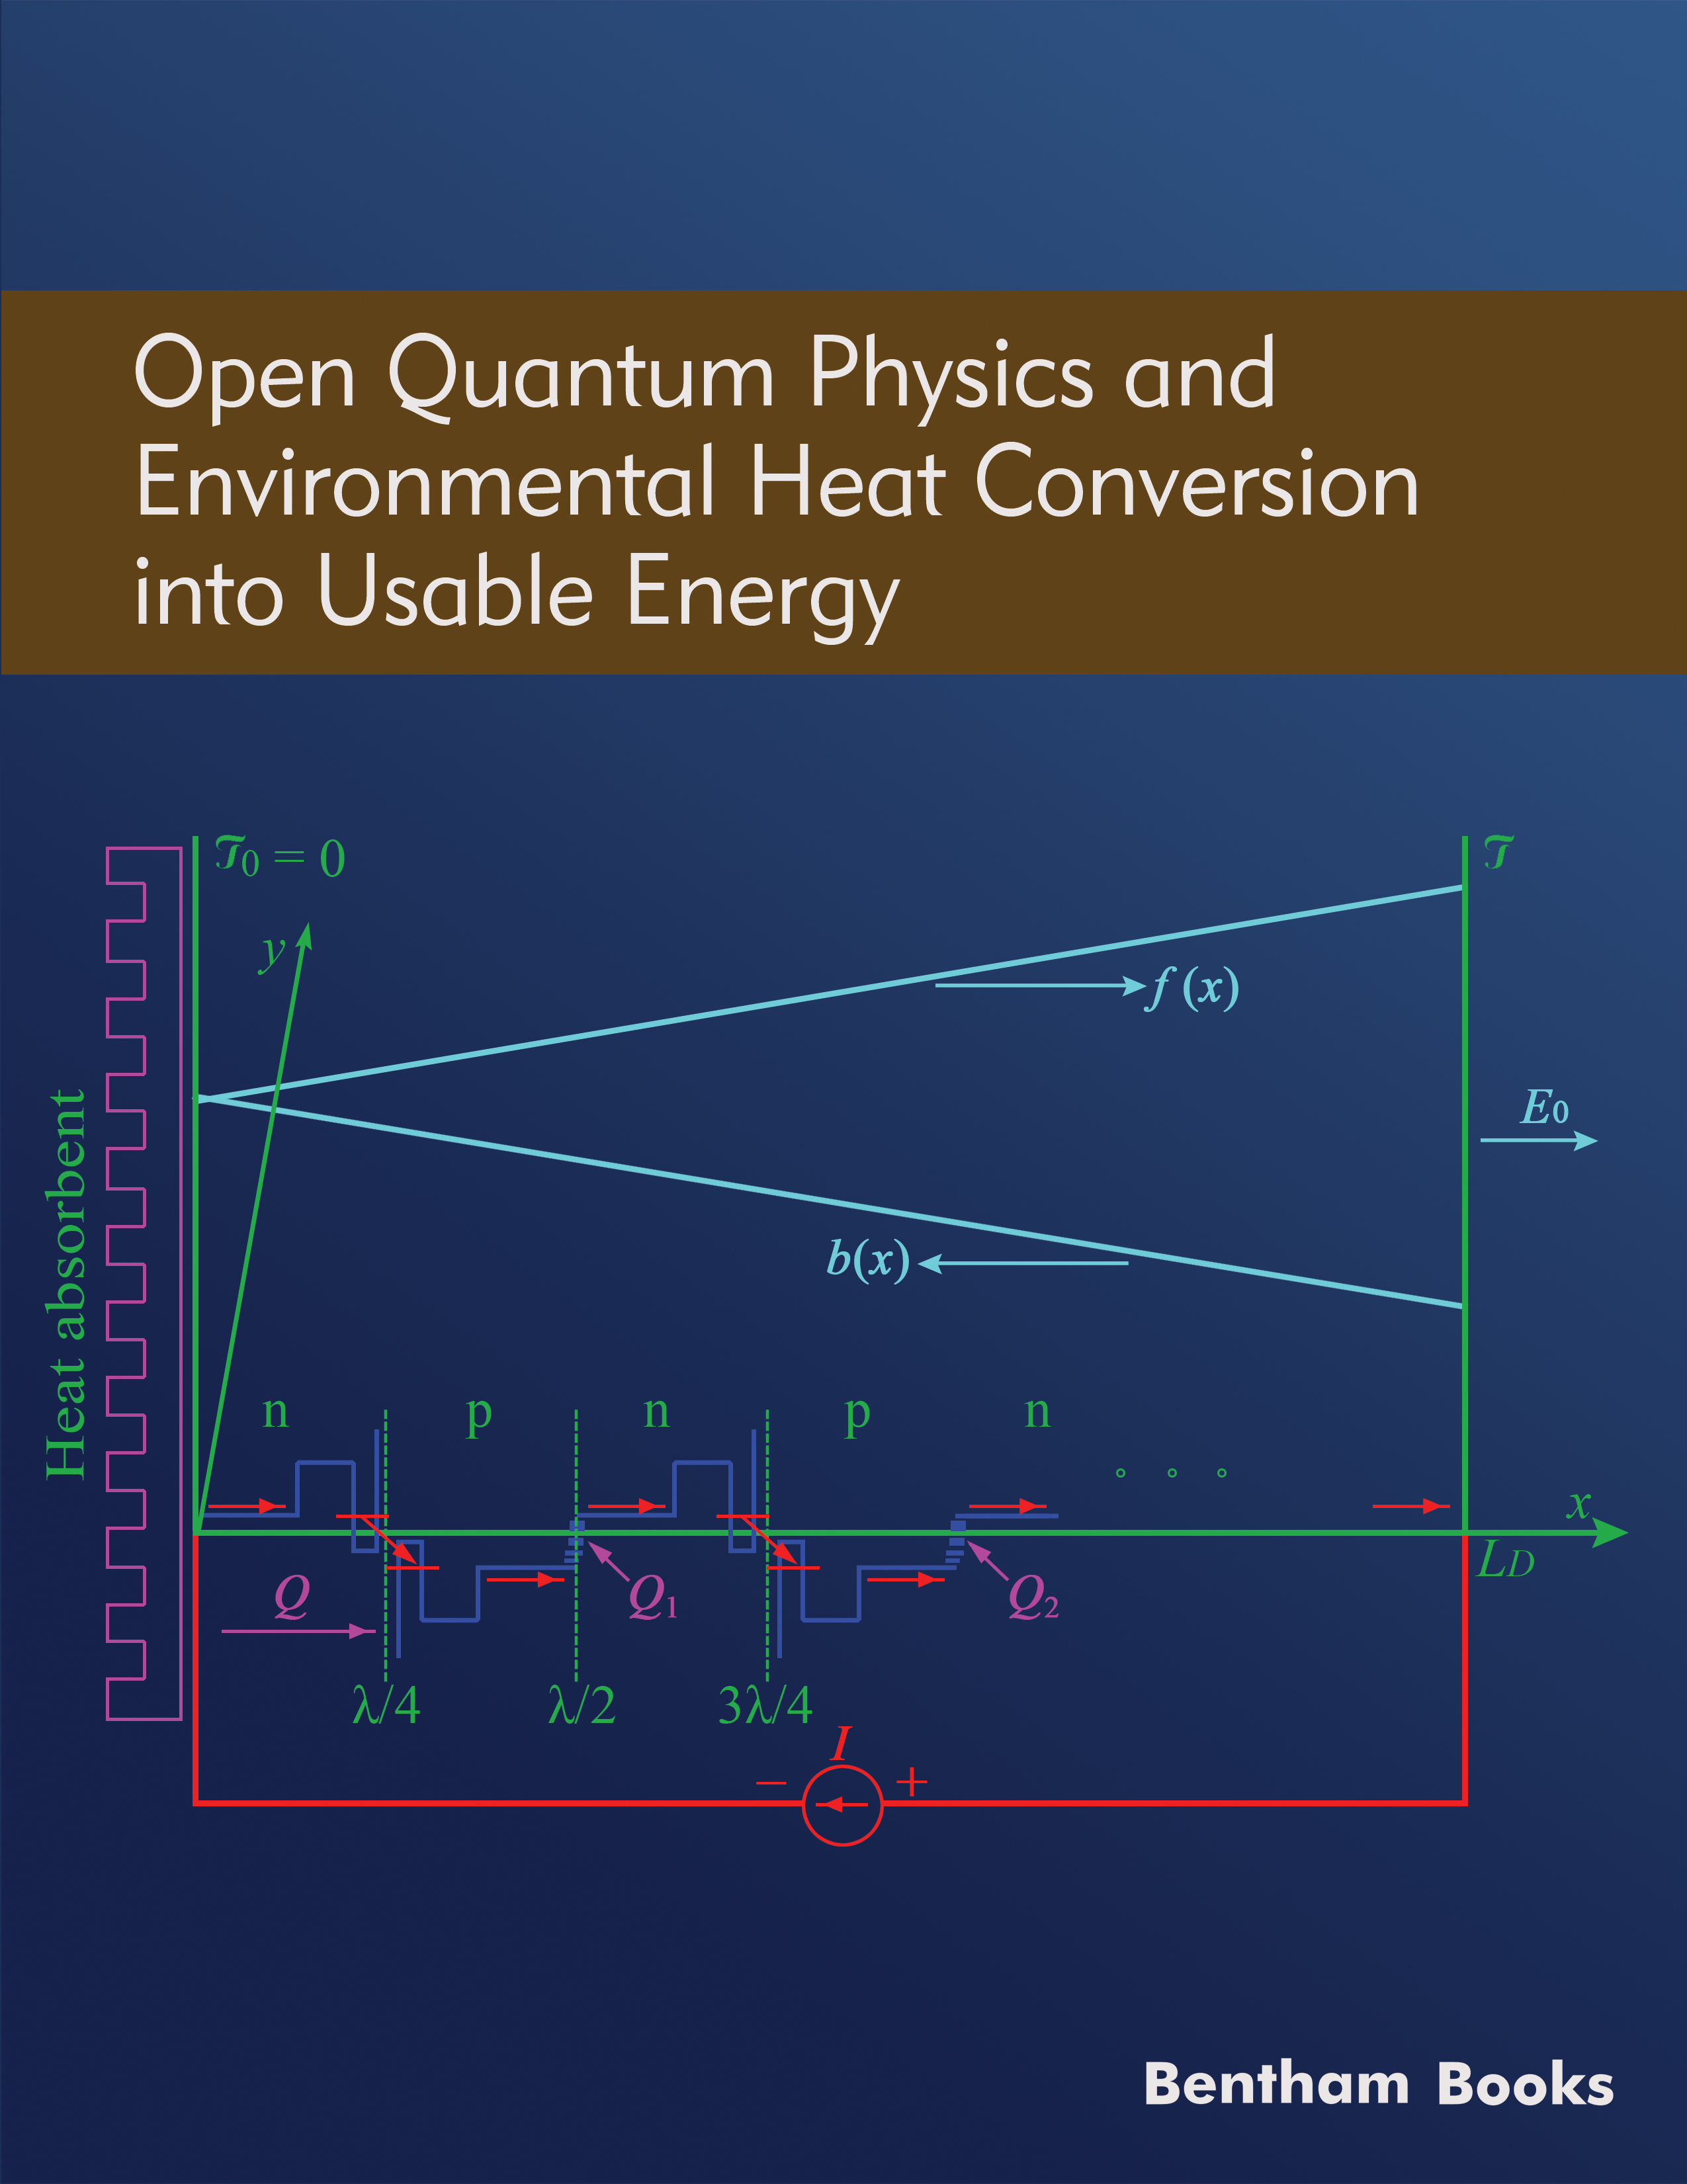 Open Quantum Physics and Environmental Heat Conversion into Usable Energy